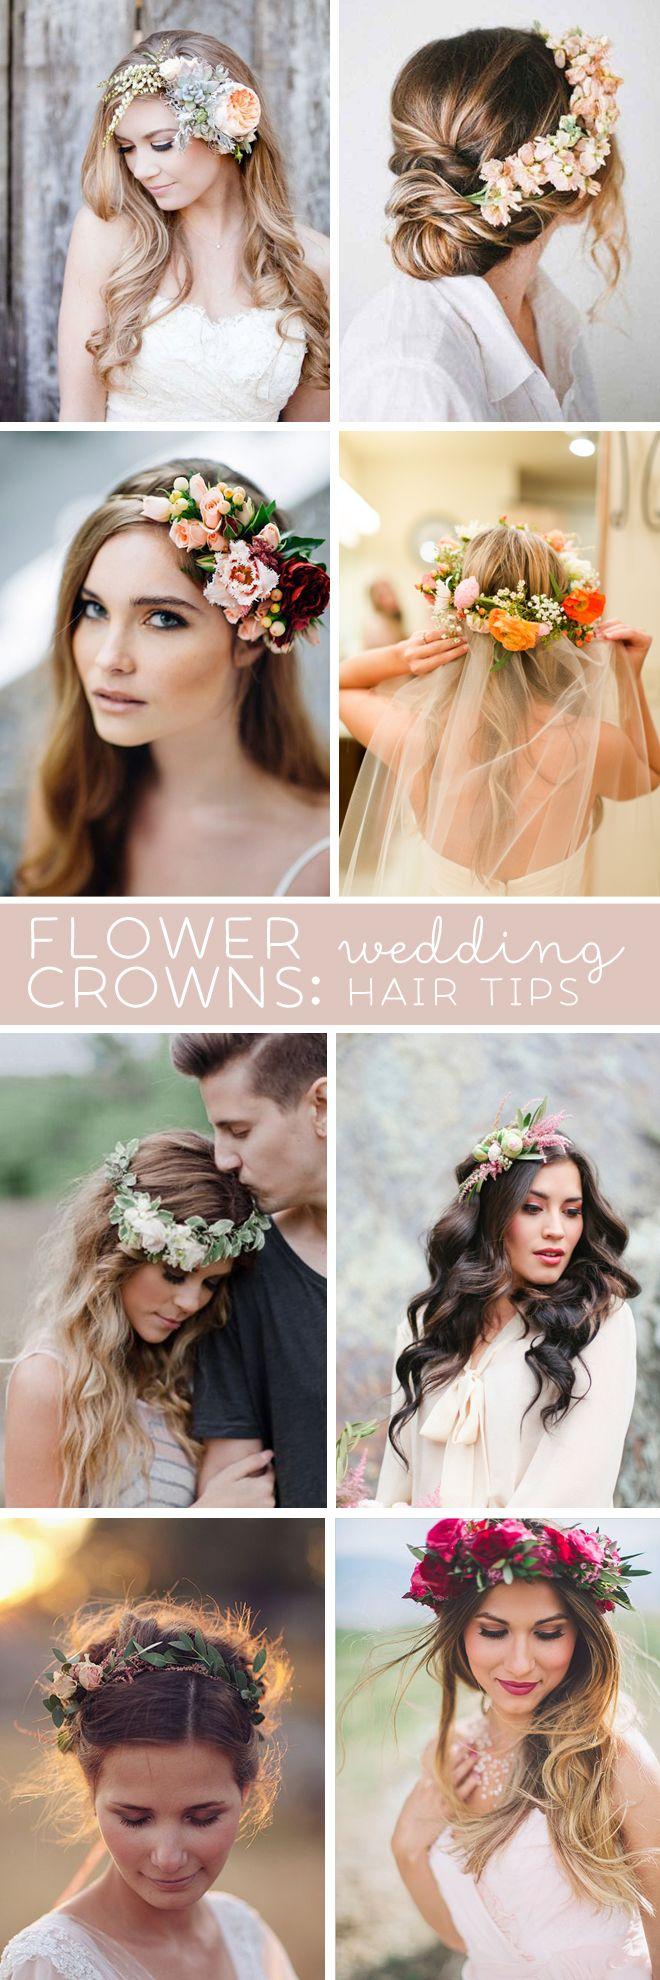 Hochzeit - Awesome Wedding Hair Tips For Wearing Flower Crowns!